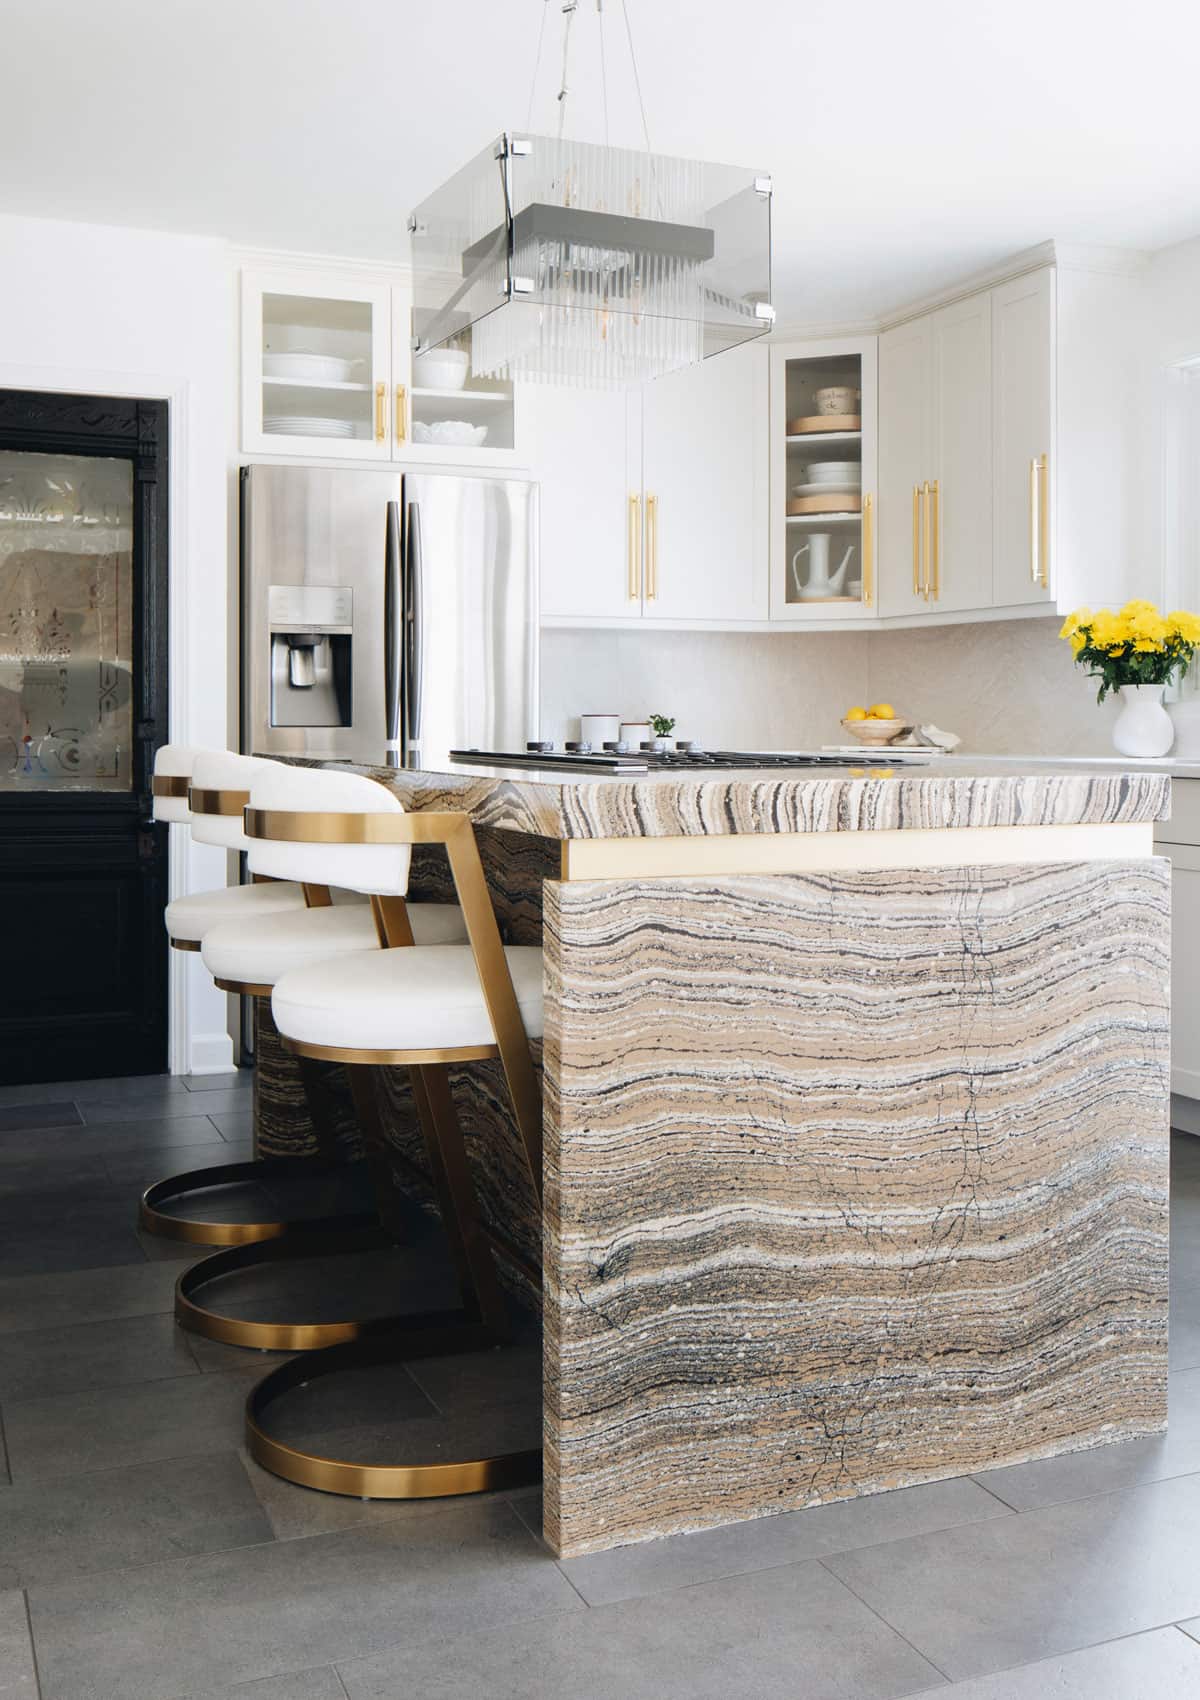 White Kitchens Are Not Out Here are 7 Ideas to Warm Them Up - Bold kitchen island design made a of quartz from Cambria warms this all white kitchen